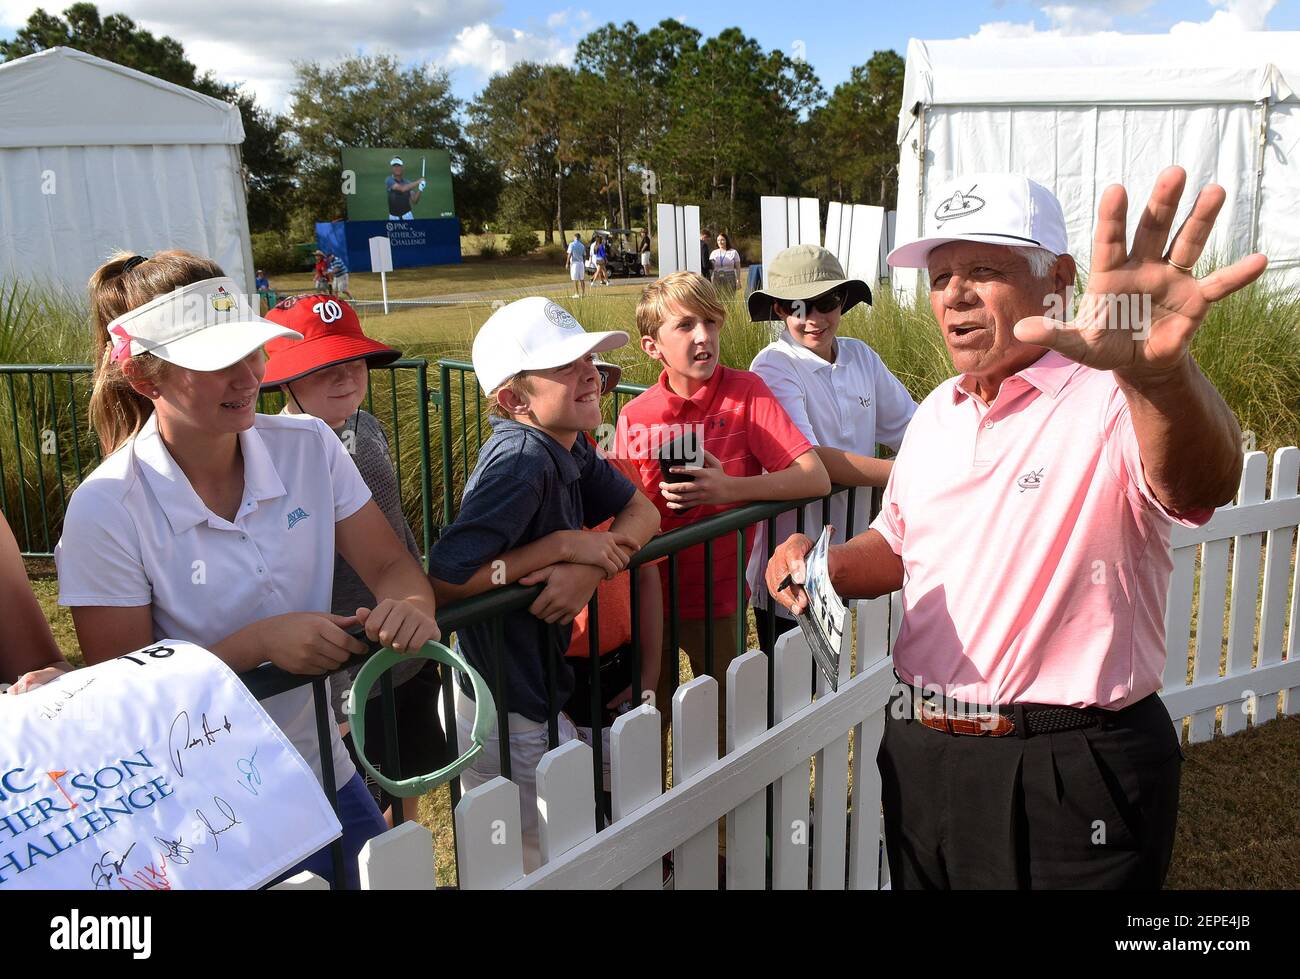 Lee Trevino signs autographs for his fans after competing in the PNC Father  Son Challenge golf tournament at the Ritz-Carlton Golf Club in Orlando.  Trevino was paired with his grandson, Daniel Trevino. (